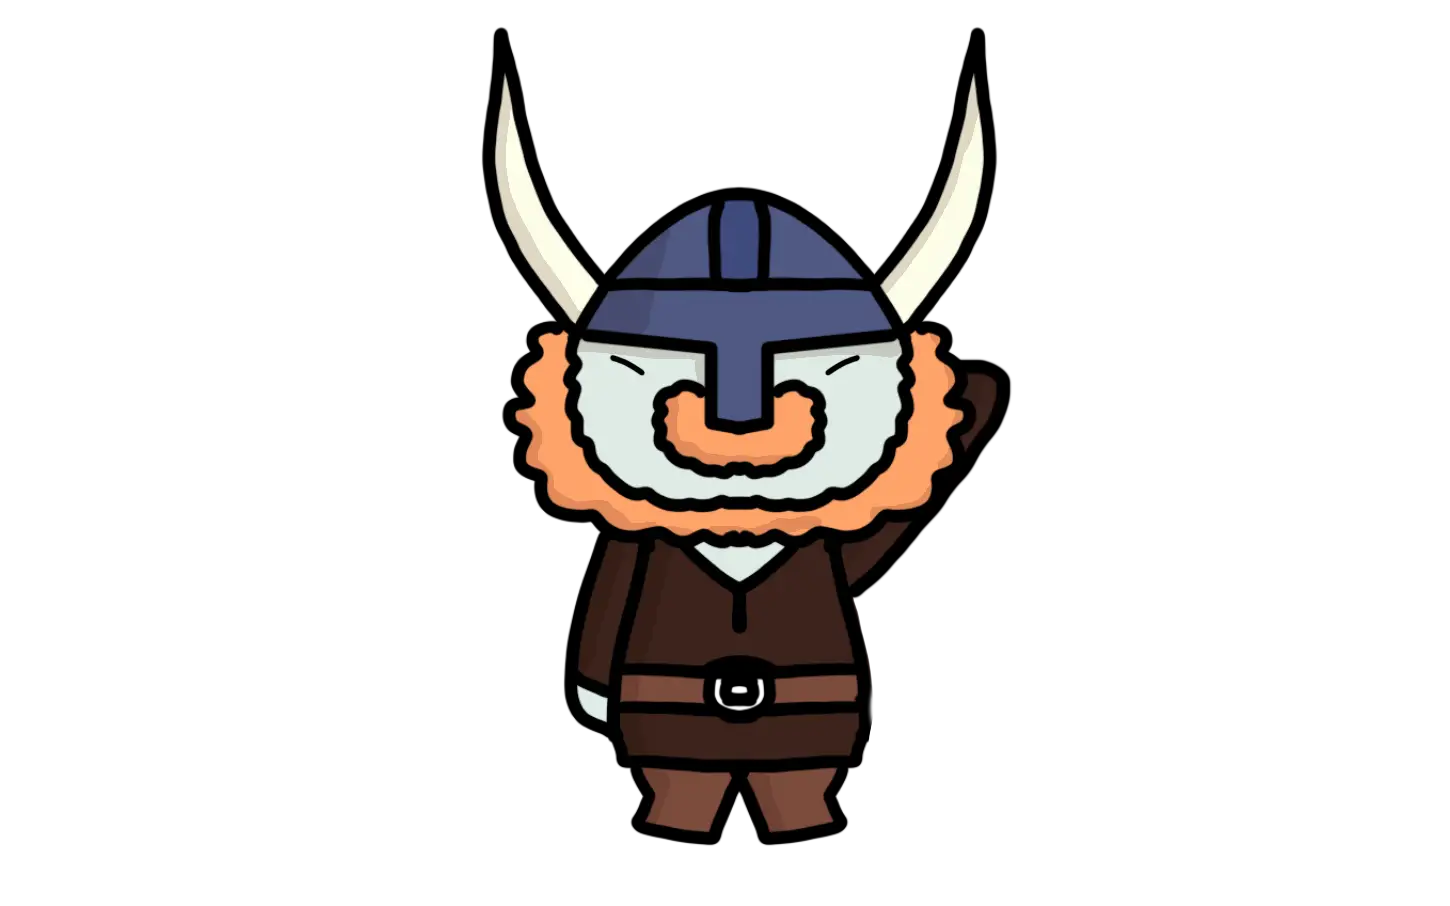 Olaf the silly viking